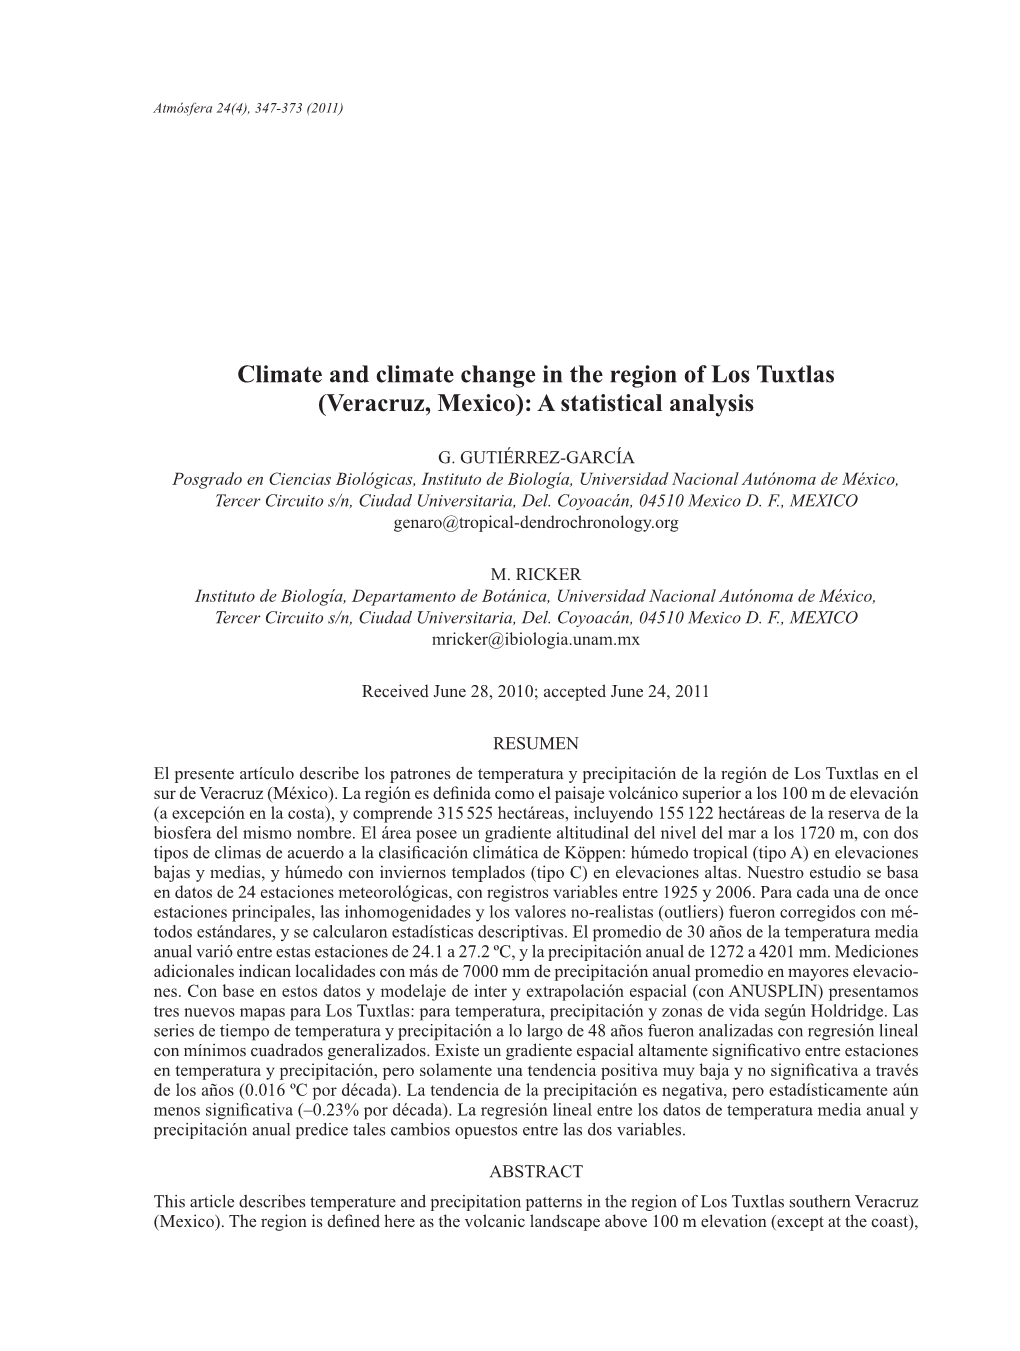 Climate and Climate Change in the Region of Los Tuxtlas (Veracruz, Mexico): a Statistical Analysis